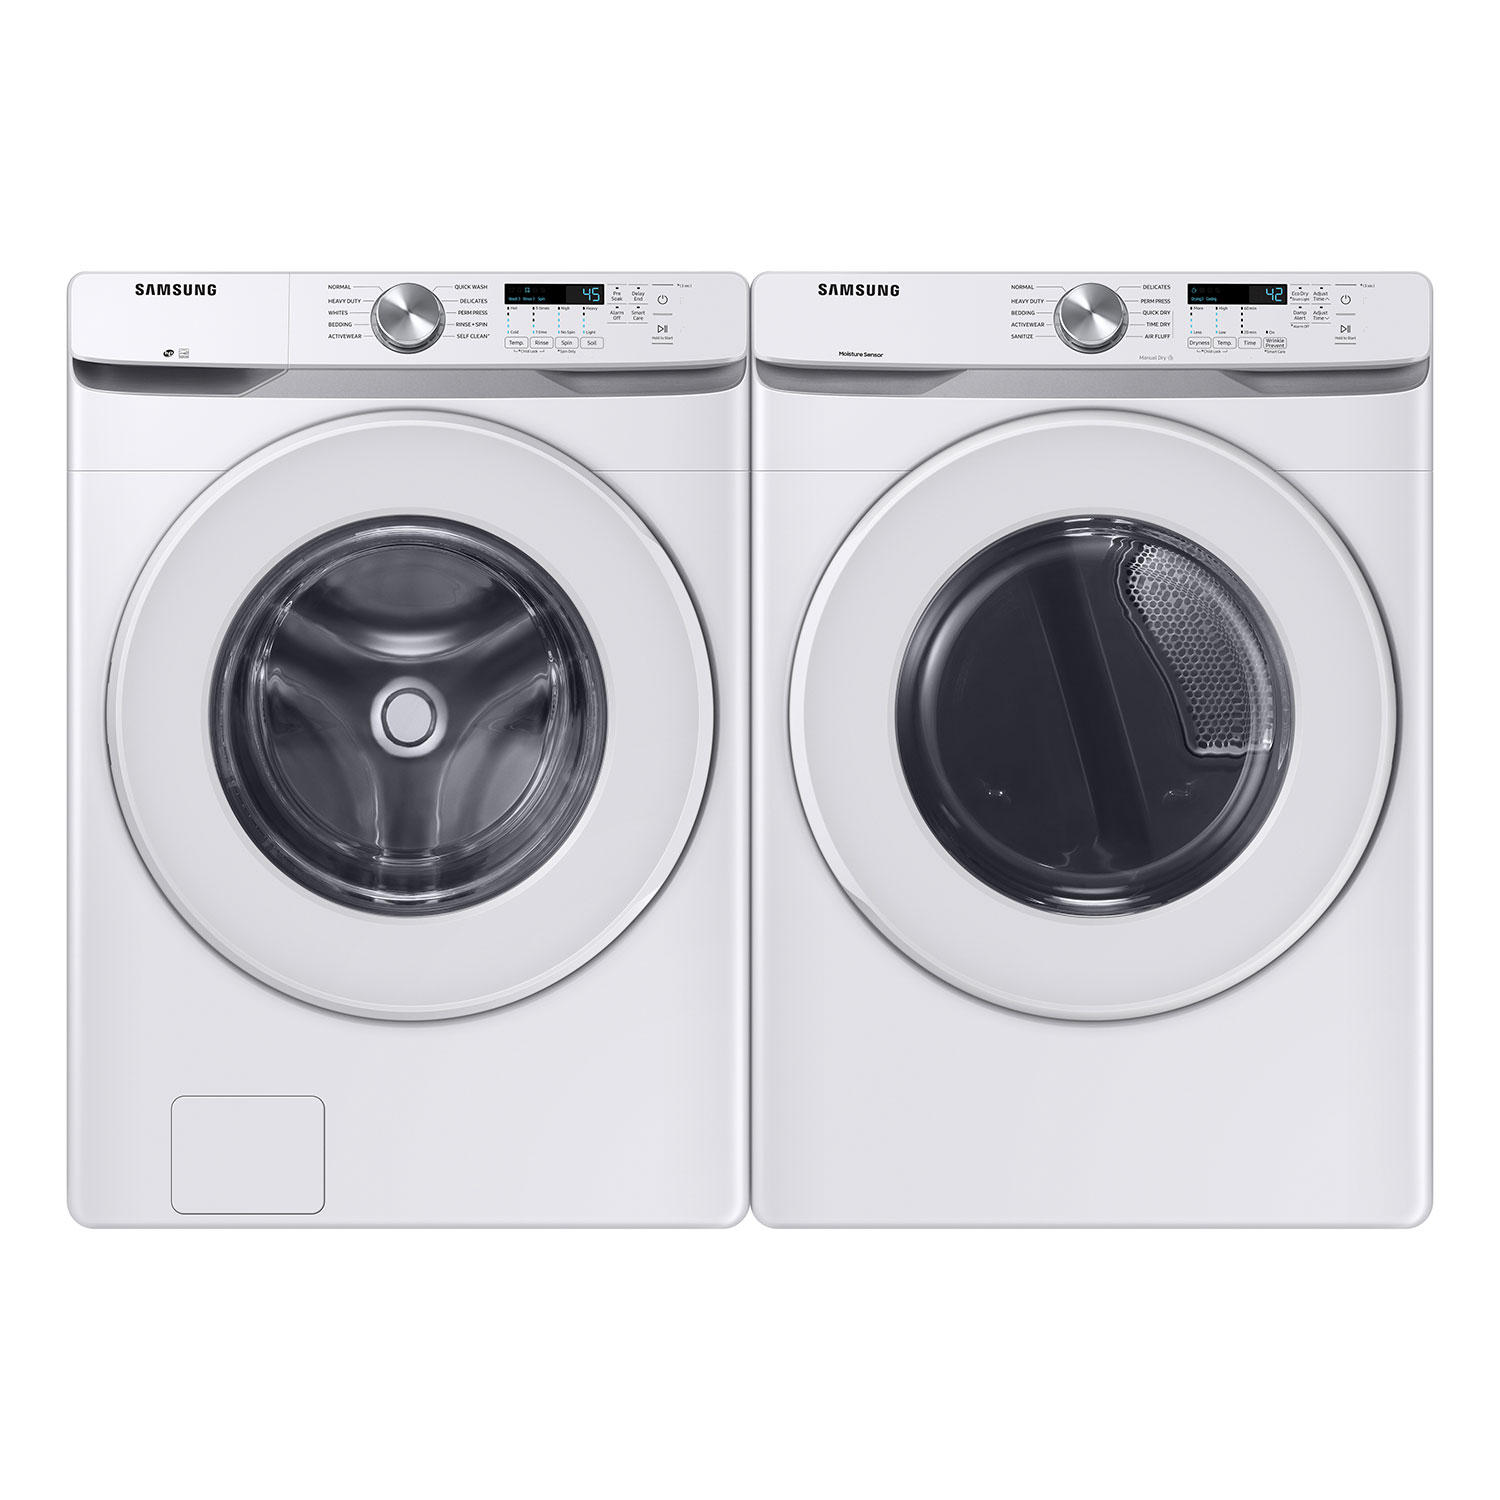 Samsung WF45T6000AW 4.5 cu. ft. Front Load Washer with Vibration Reduction Technology + Samsung DVG45T6000W 7.5 cu. ft. Gas Dryer